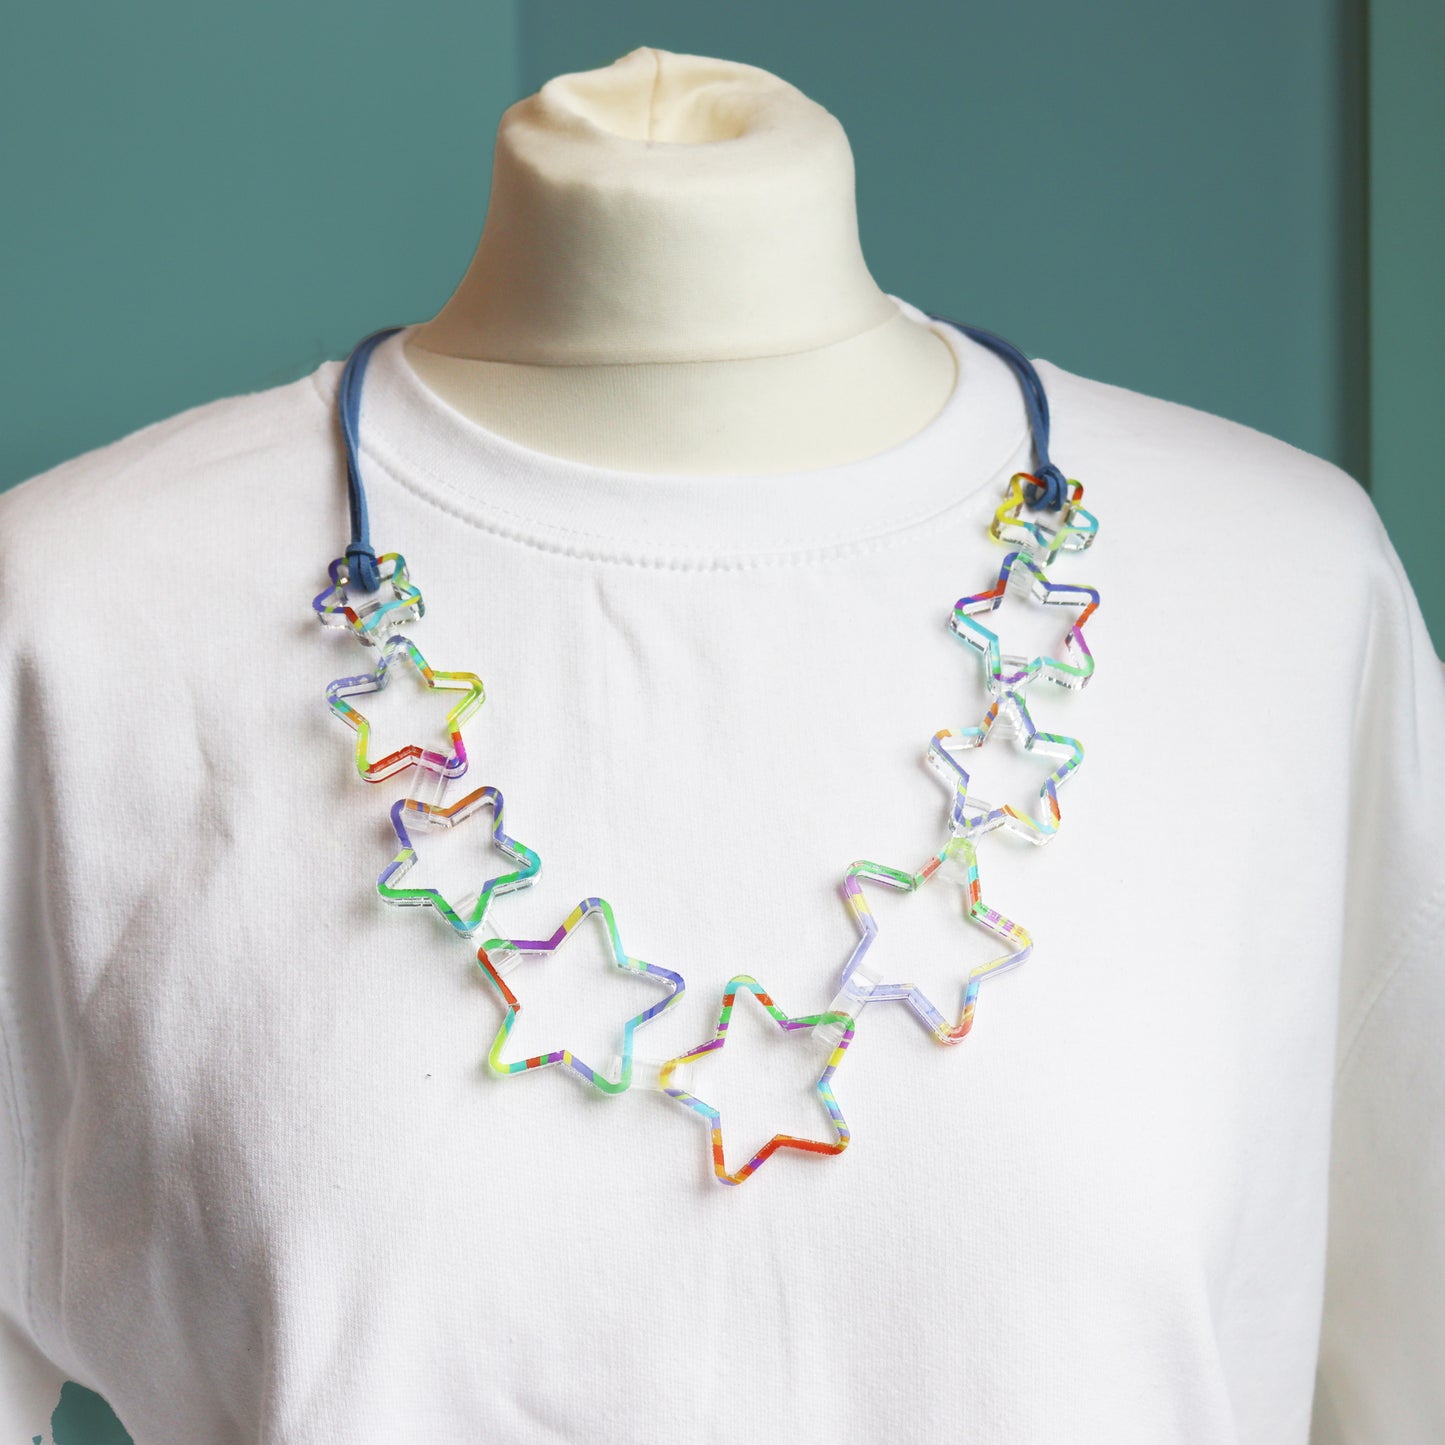 printed star acrylic clear necklace statement fashion jewellery on white jumper